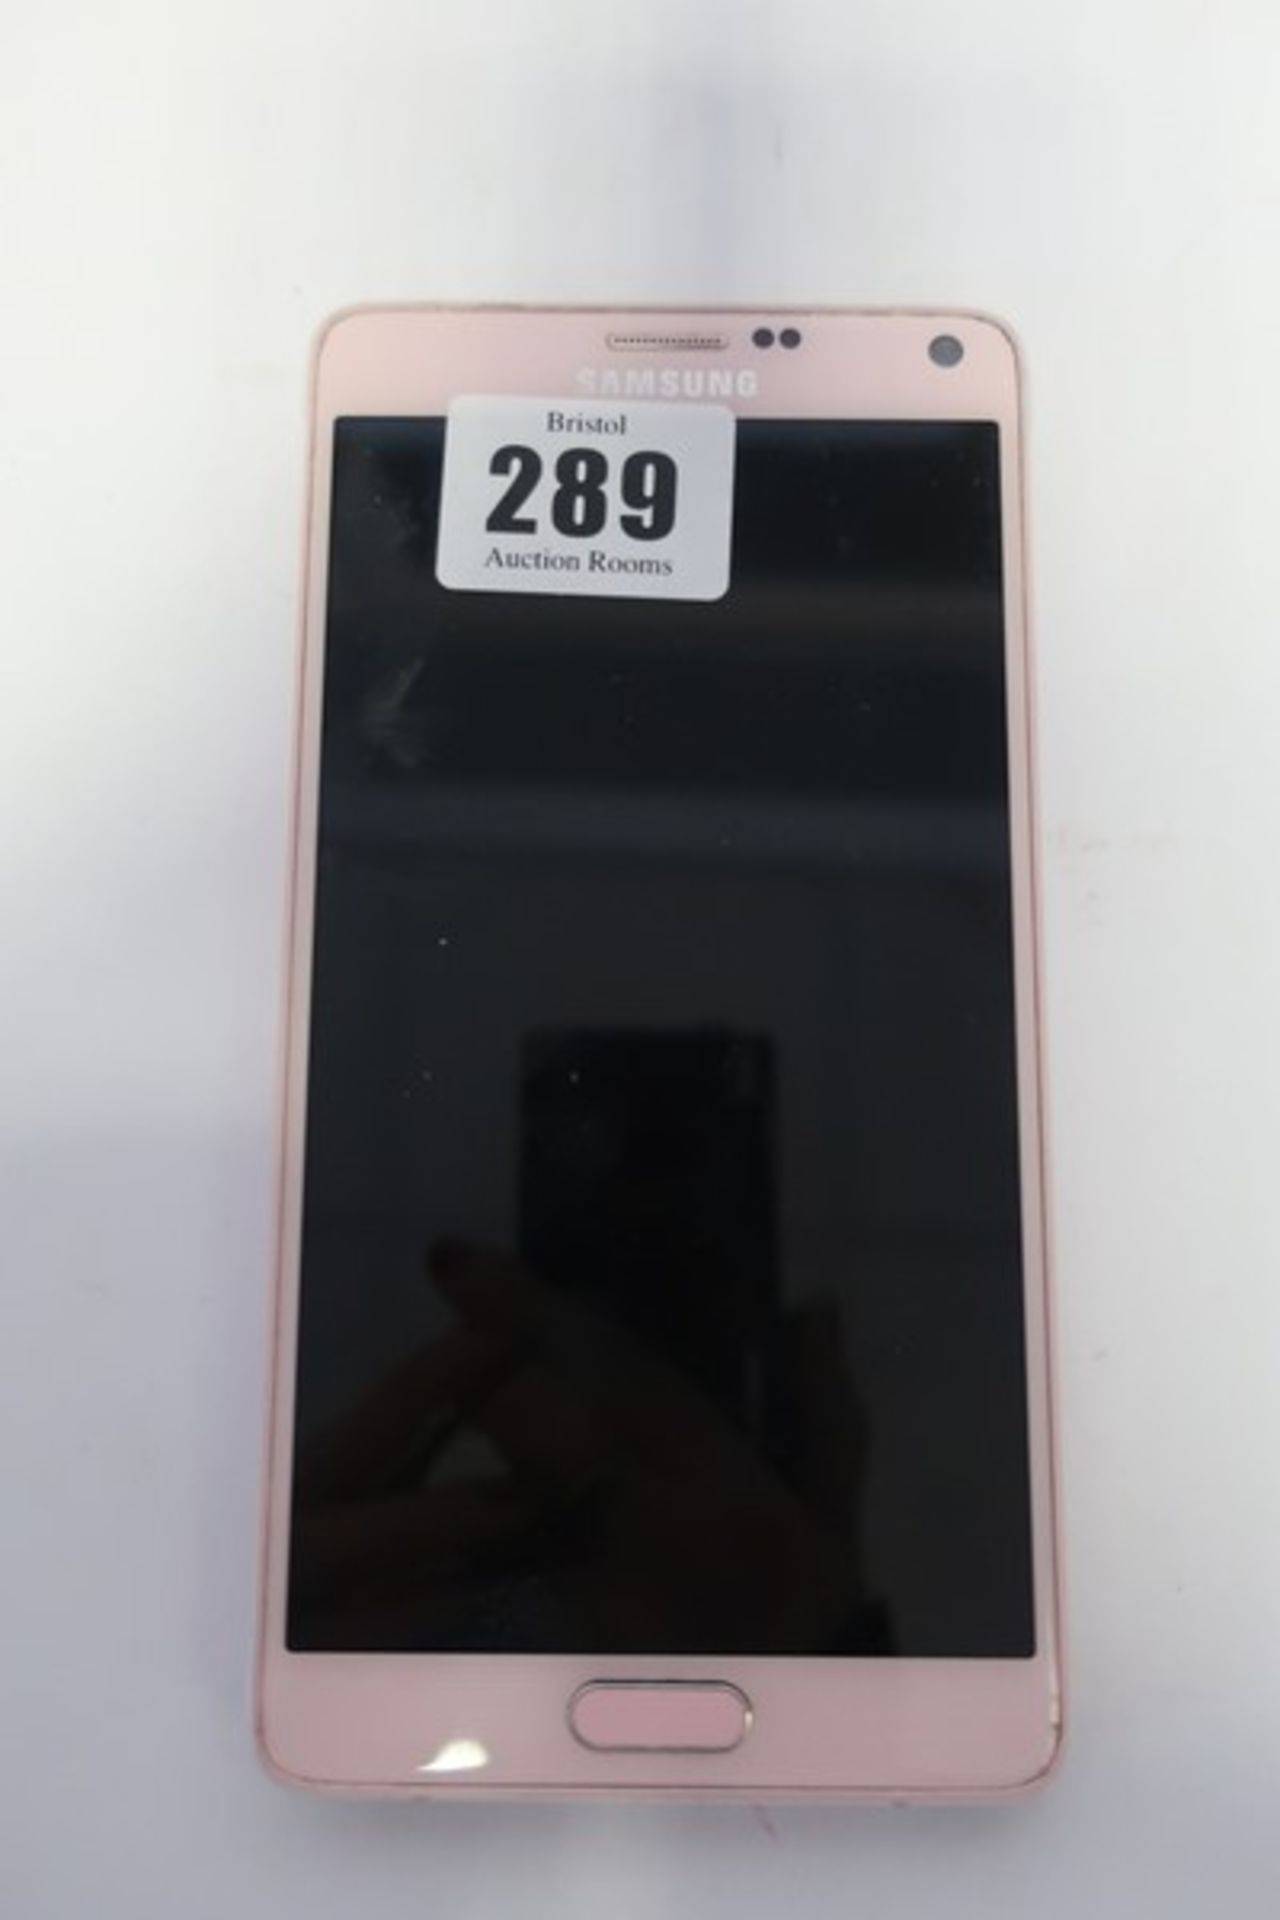 A Samsung Galaxy Note 4 SM-N910U 32GB in Pink (Missing S-Pen) (IMEI: 355693061336361) (FRP Clear).